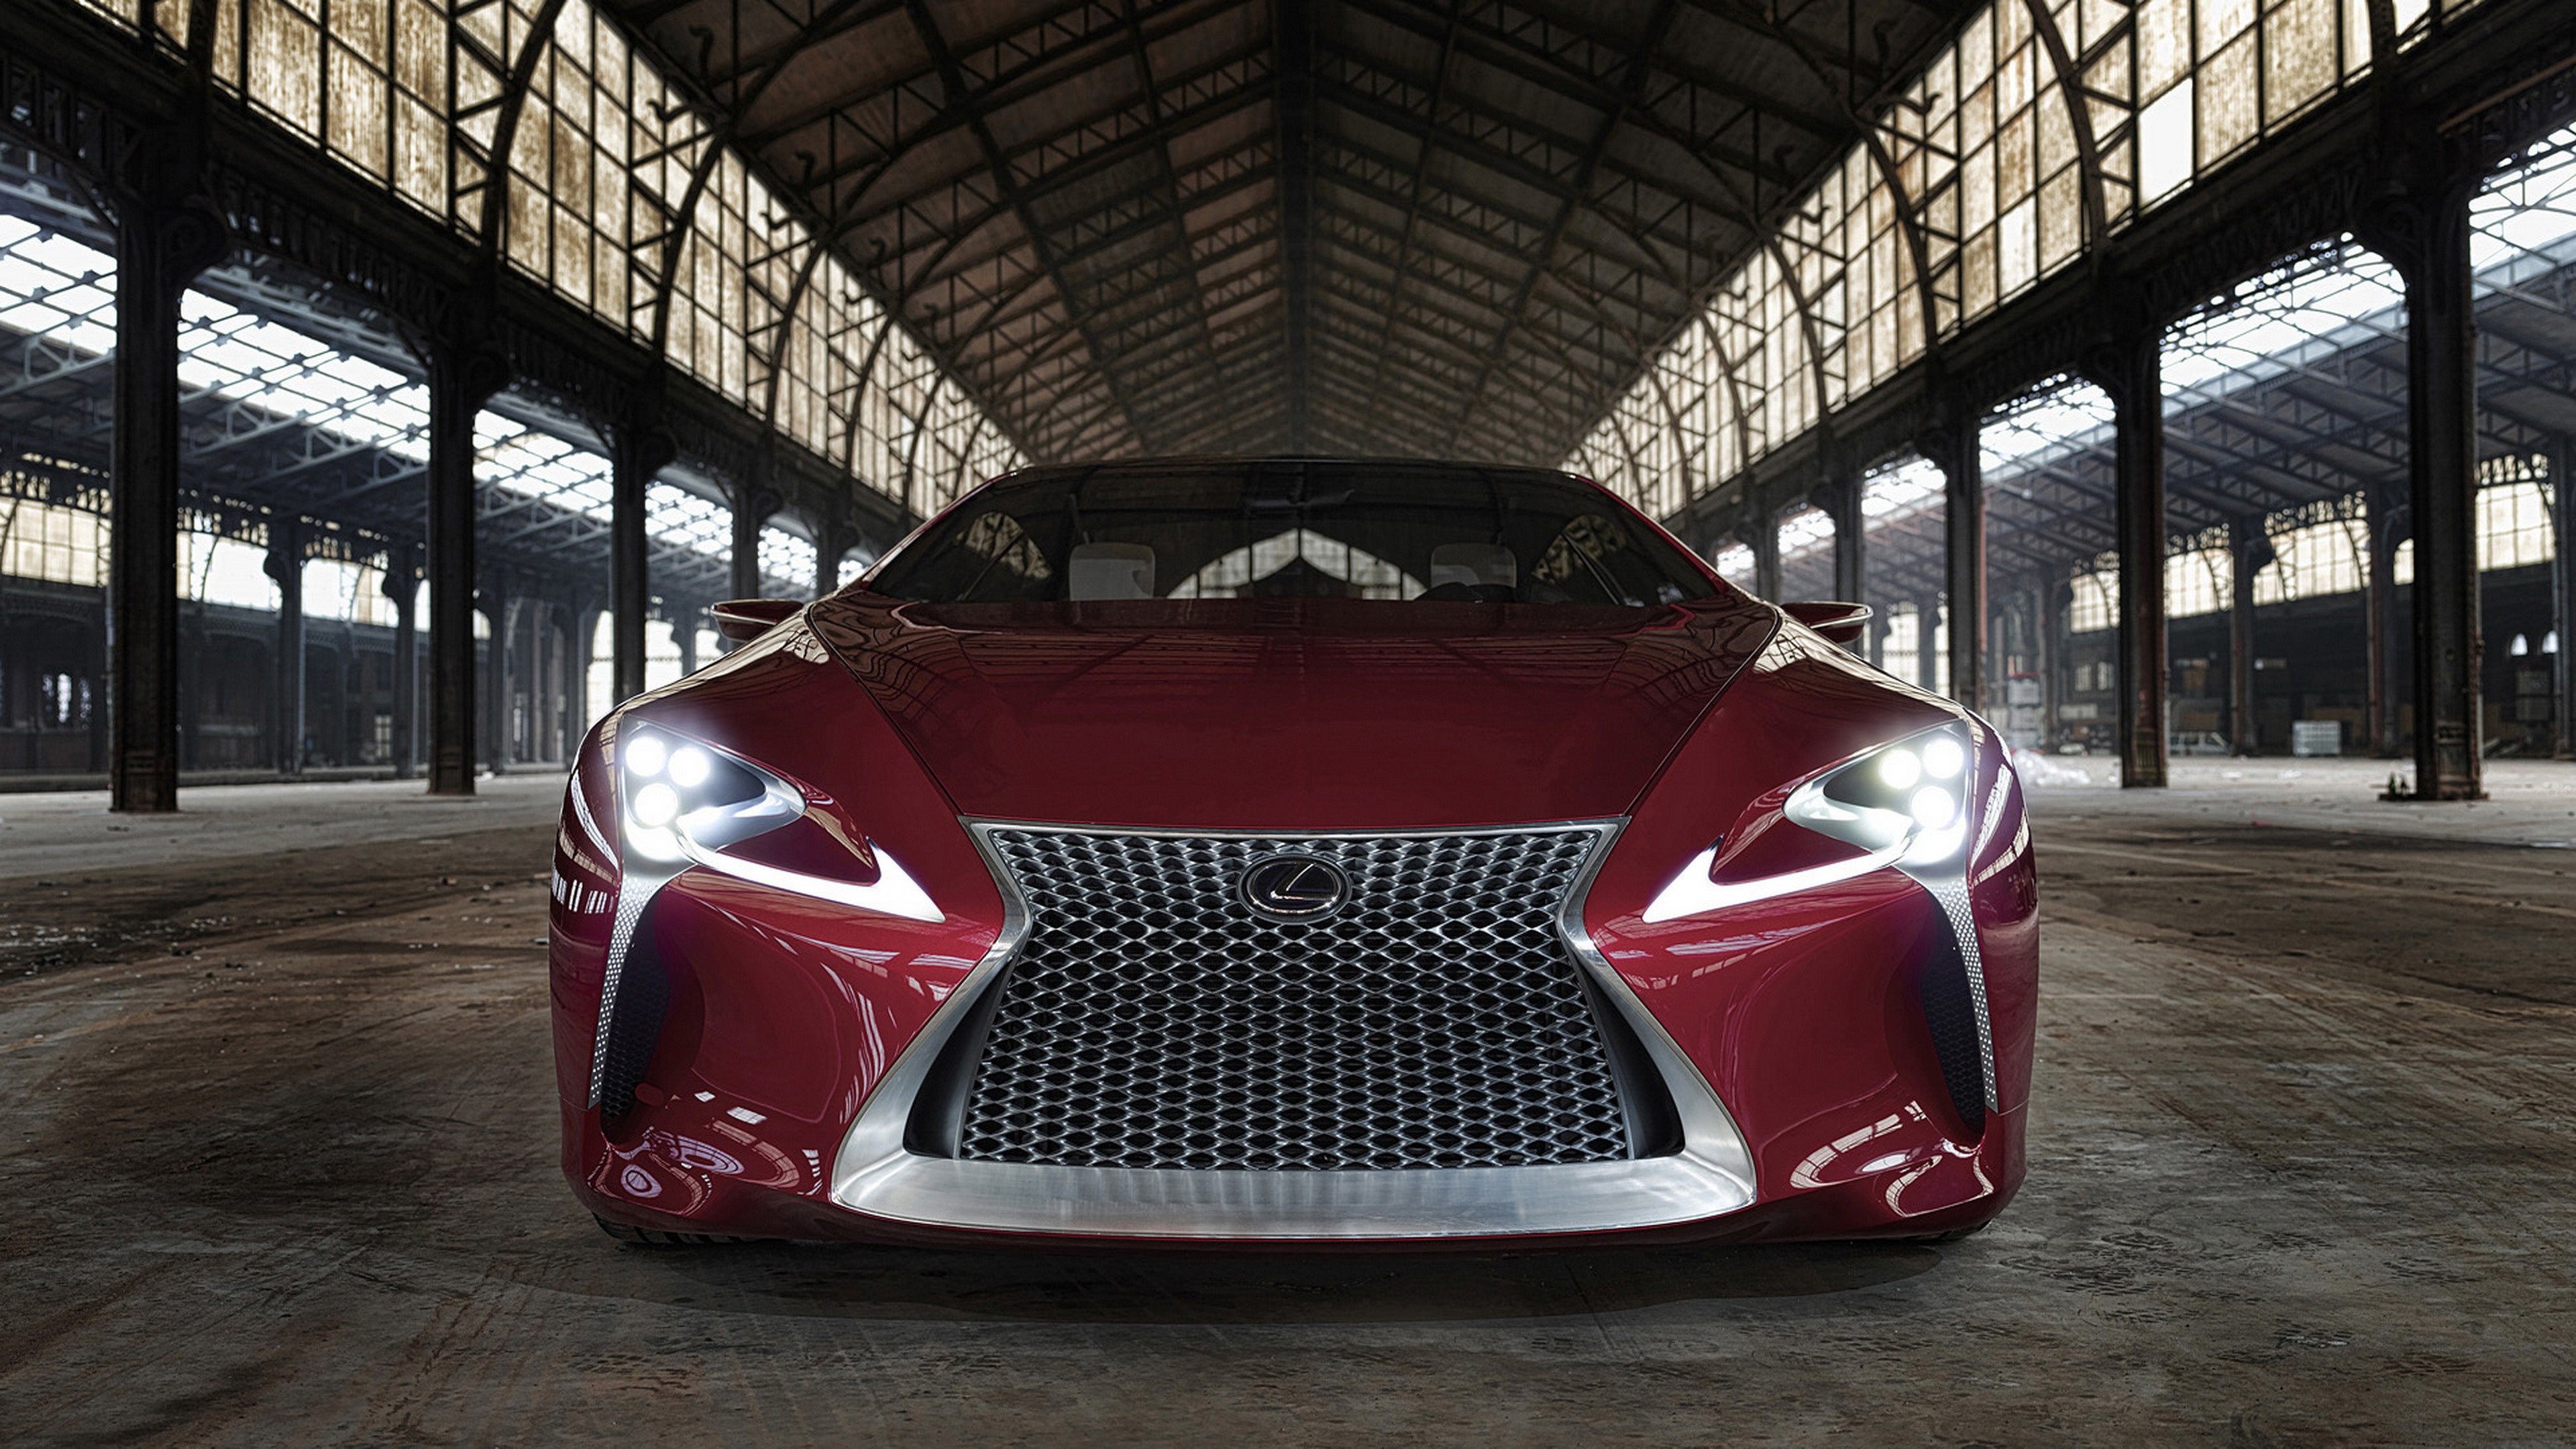 Lf Lc Wallpaper For Android Download, Hd Car Images, - Lexus Lf Lc , HD Wallpaper & Backgrounds